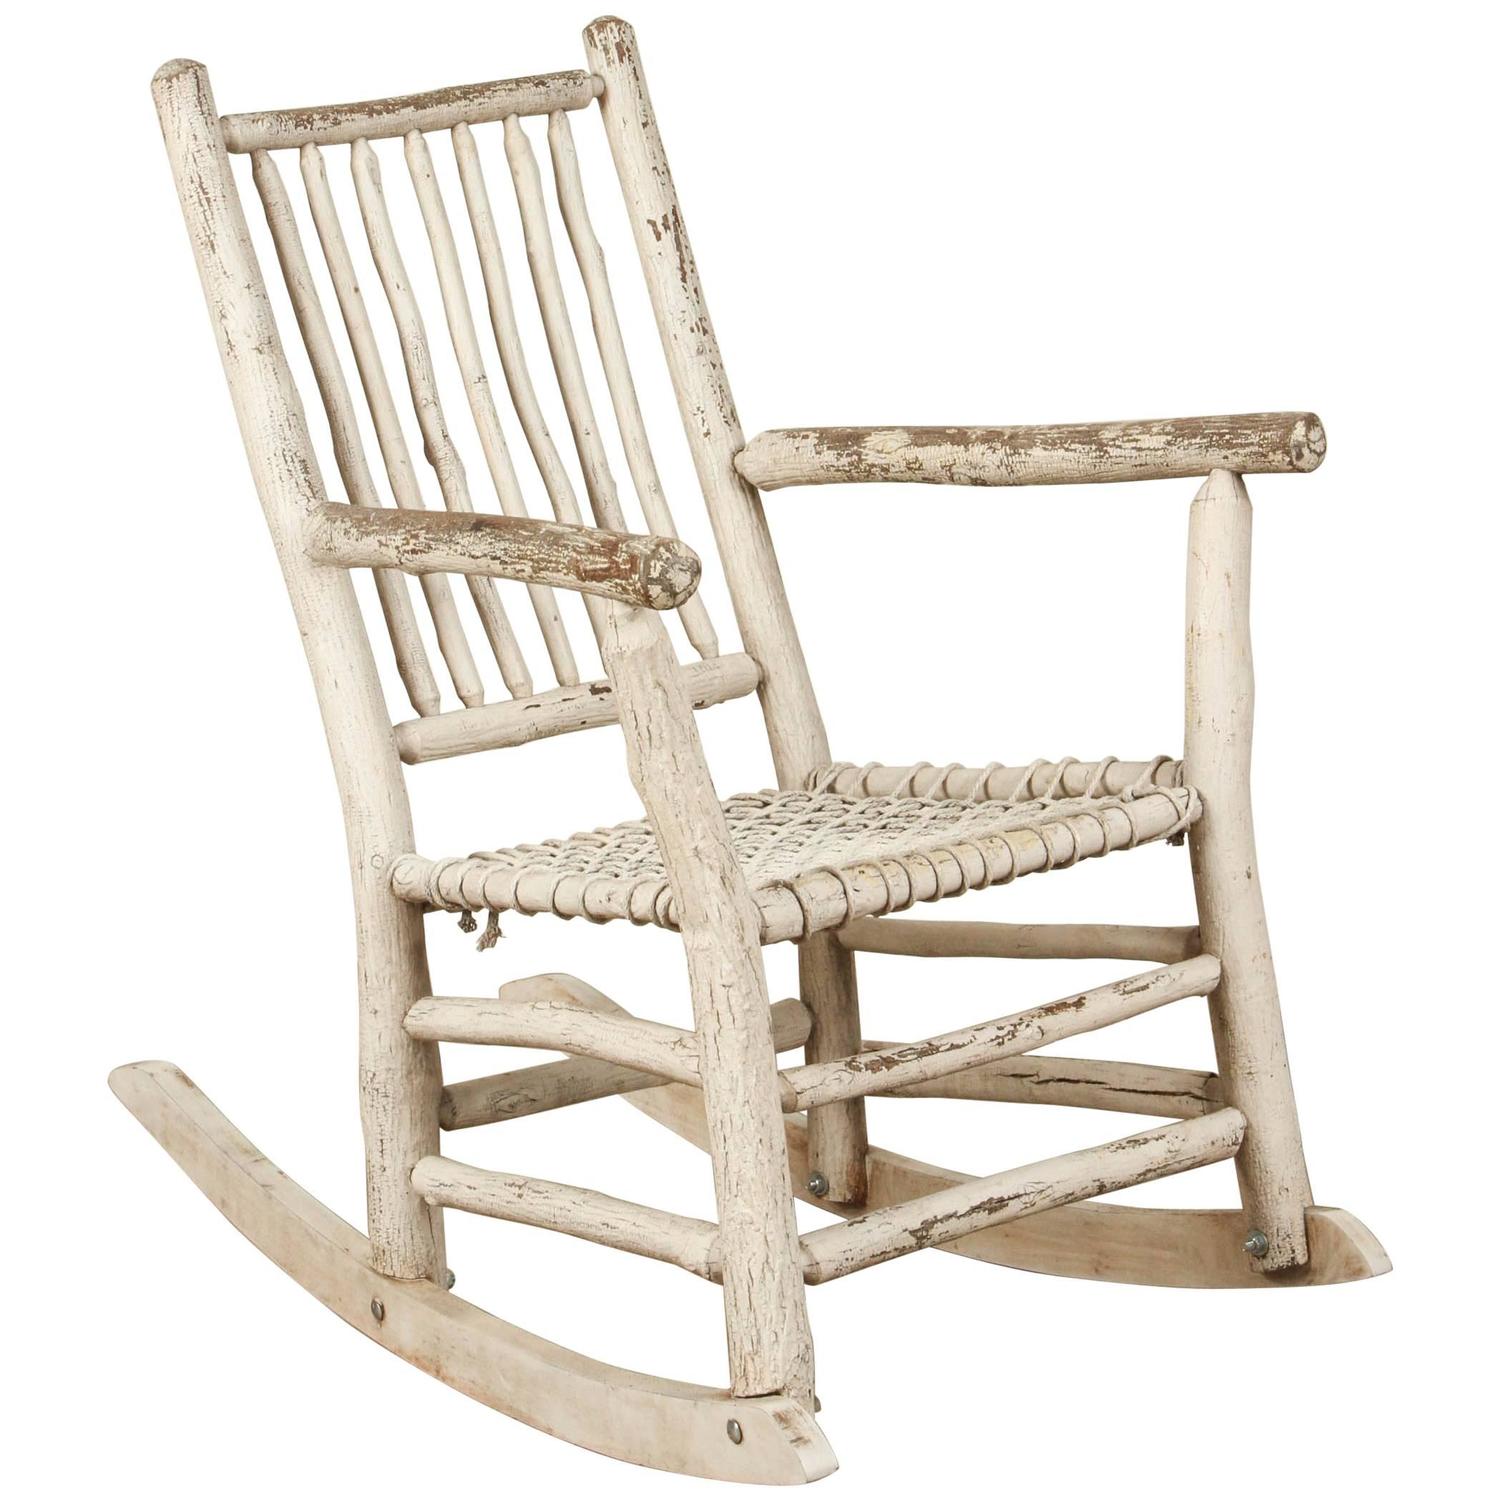 White Painted Rustic Rocking Chair For Sale at 1stdibs